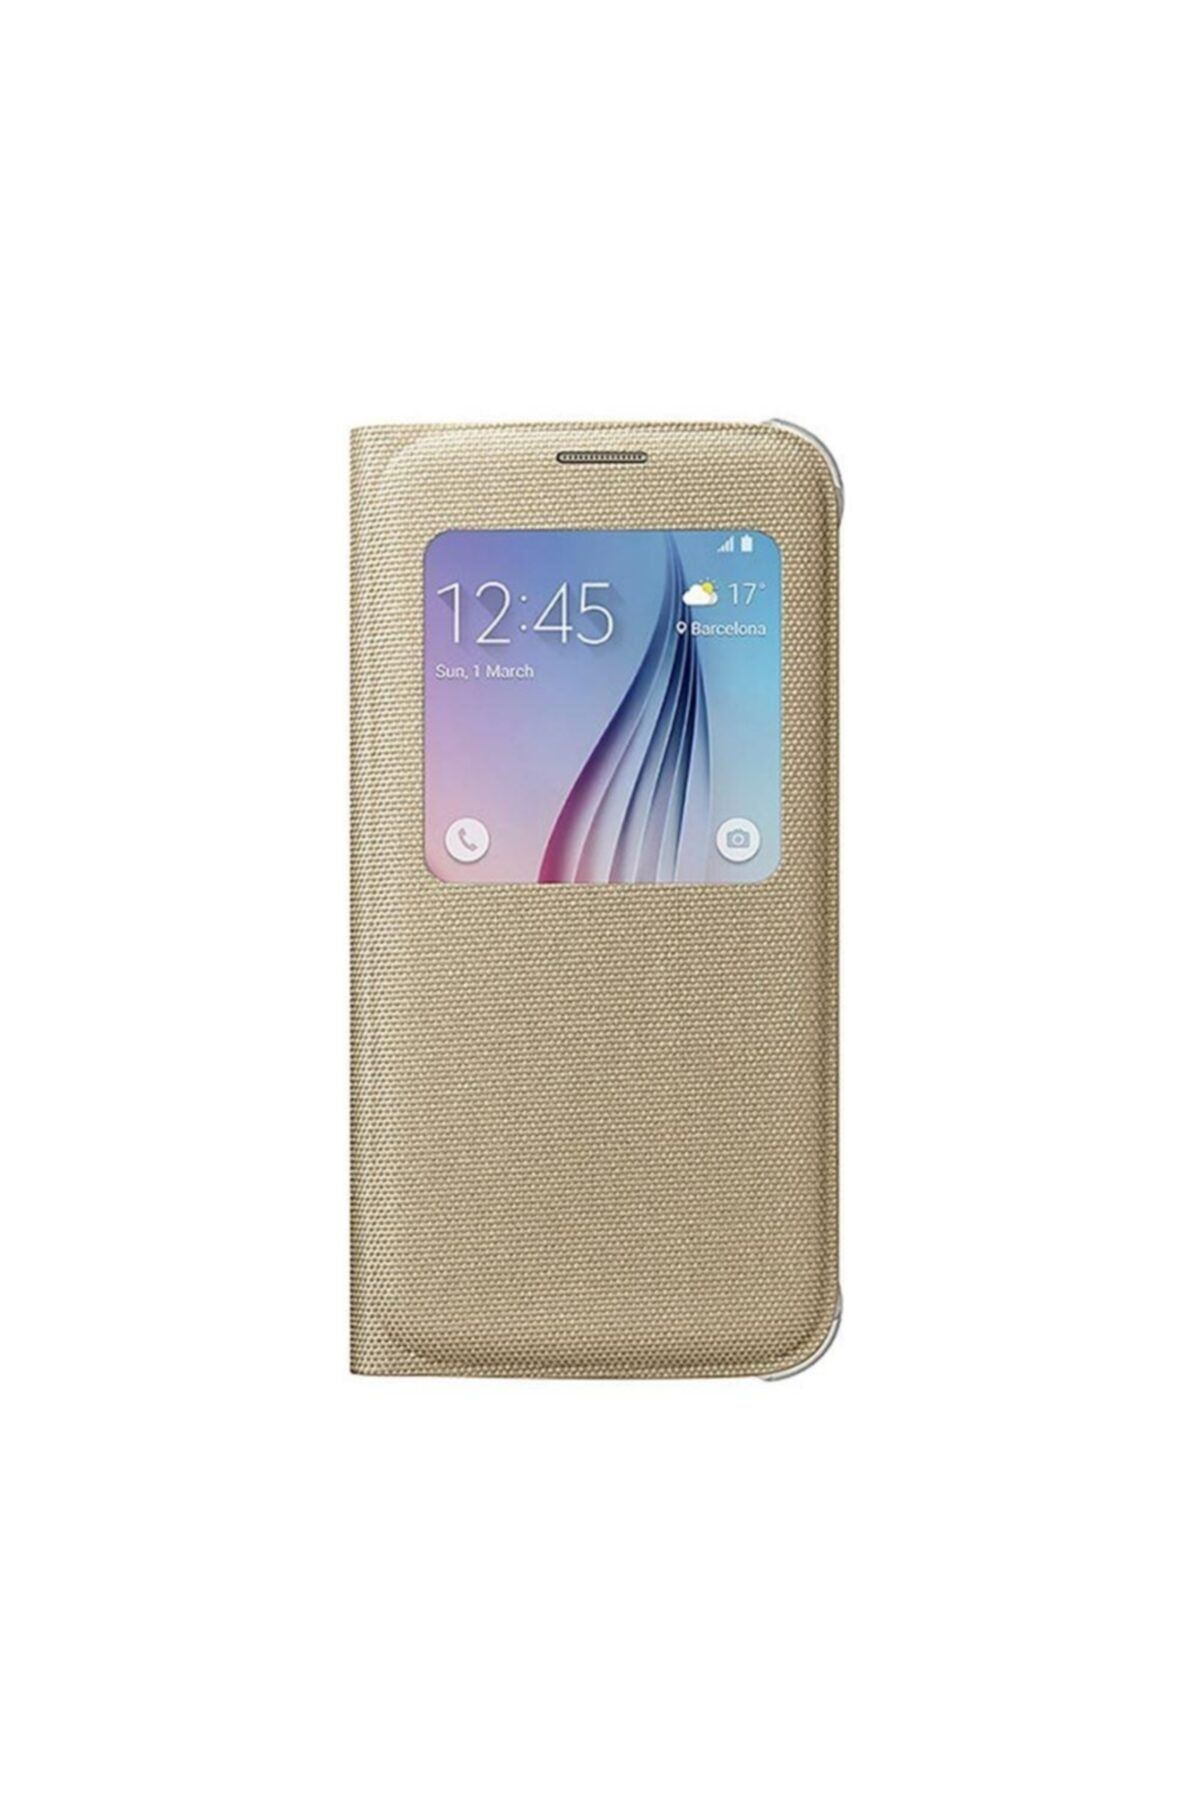 Samsung Galaxy S6 Fabric S View Cover-gold